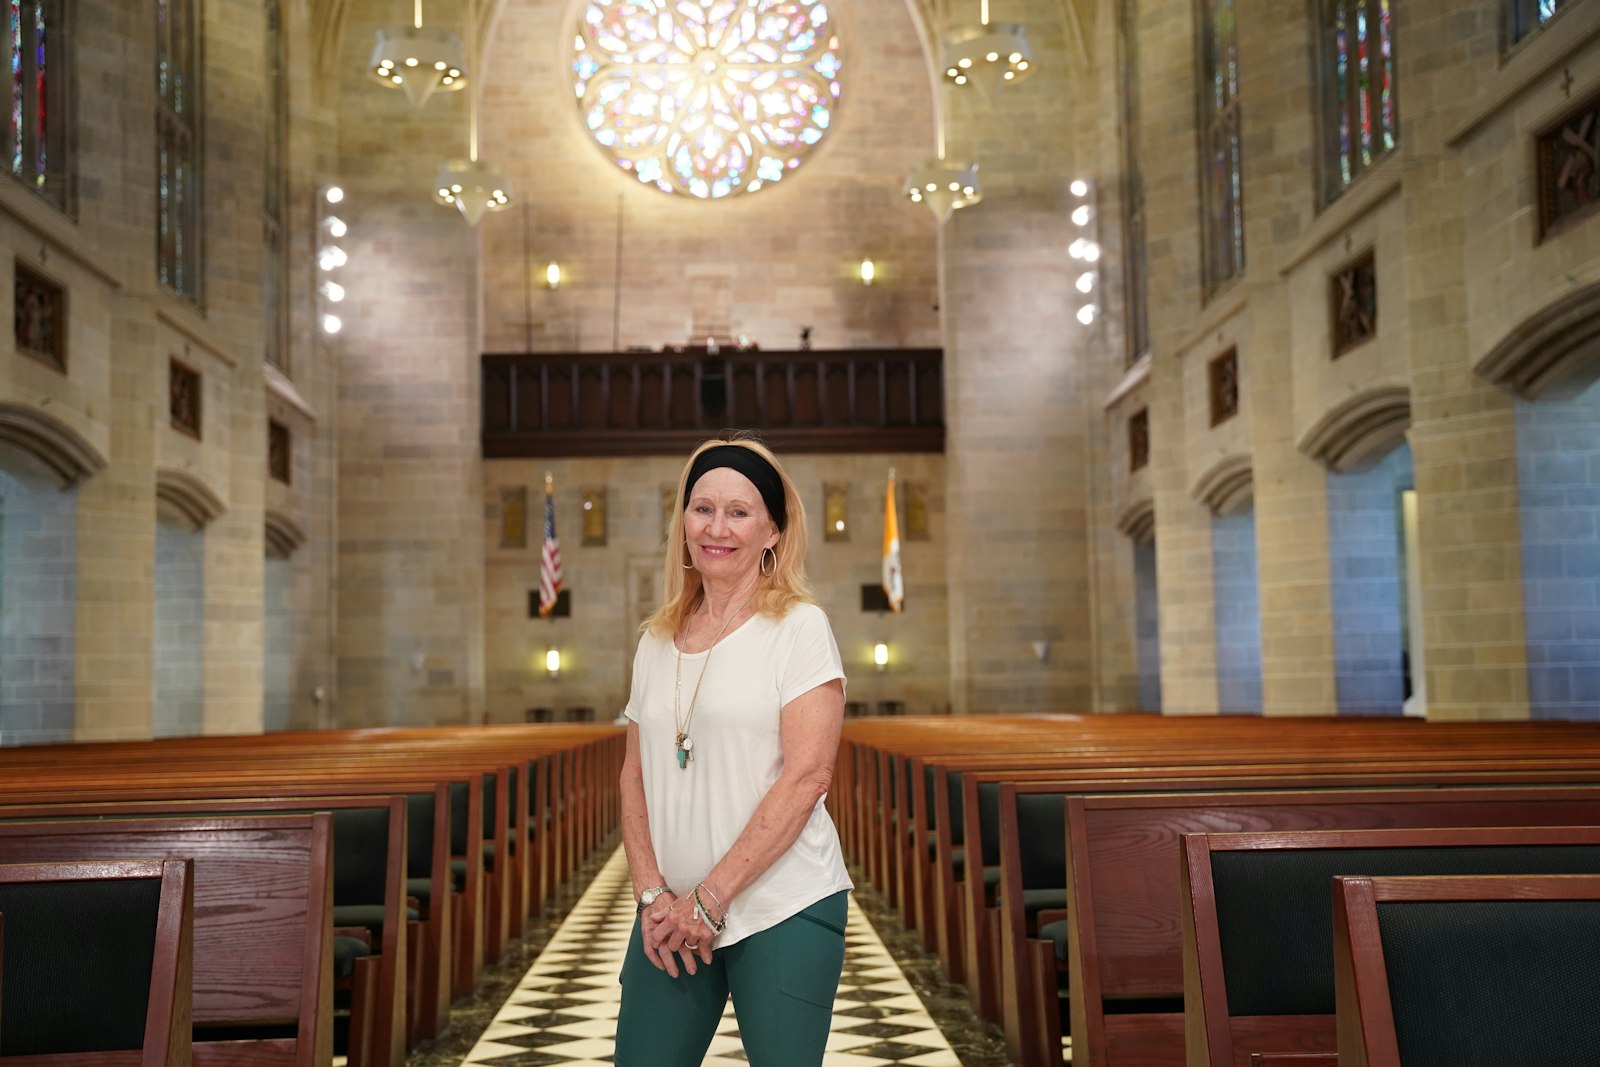 Fuller says she feels an energy when she visits the Cathedral of the Most Blessed Sacrament, particularly for her mother, who was young when she gave birth to her. Fuller said the cathedral will always be home for her, the place where she was found by two nursing students, the beginning of life’s journey in the Catholic faith.